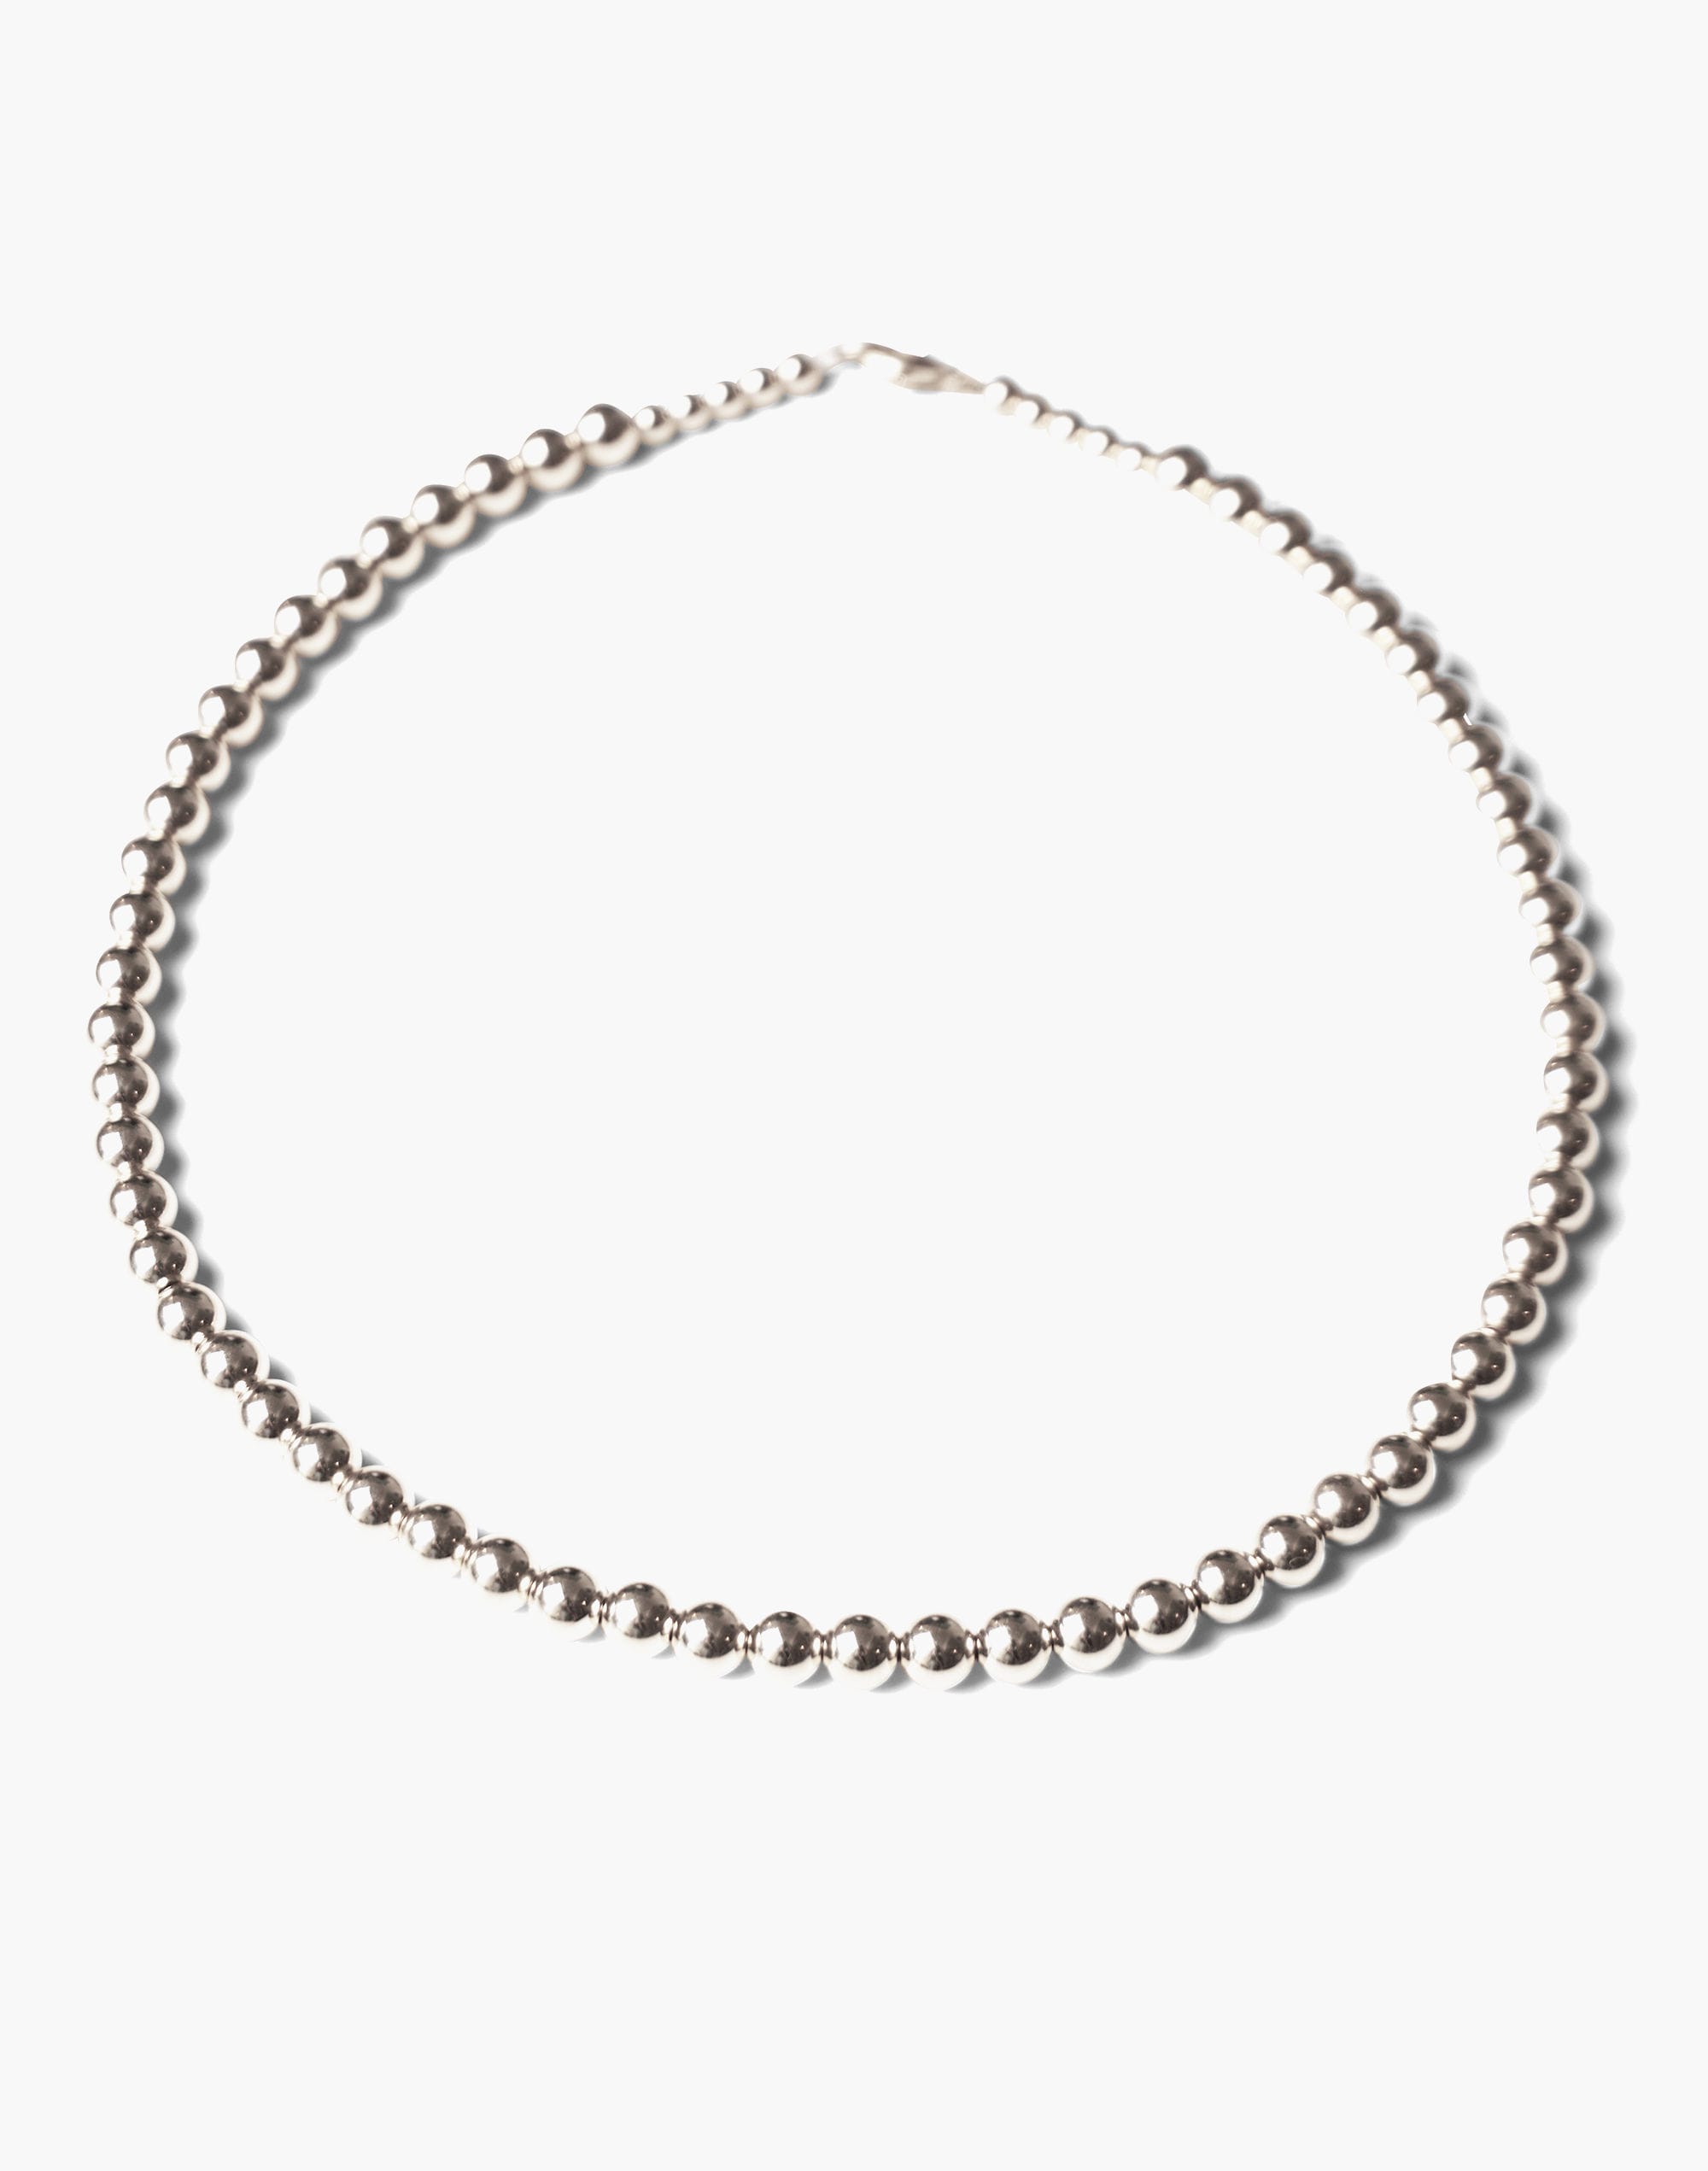 Charlotte Cauwe Studio Bead Necklace in Sterling Silver